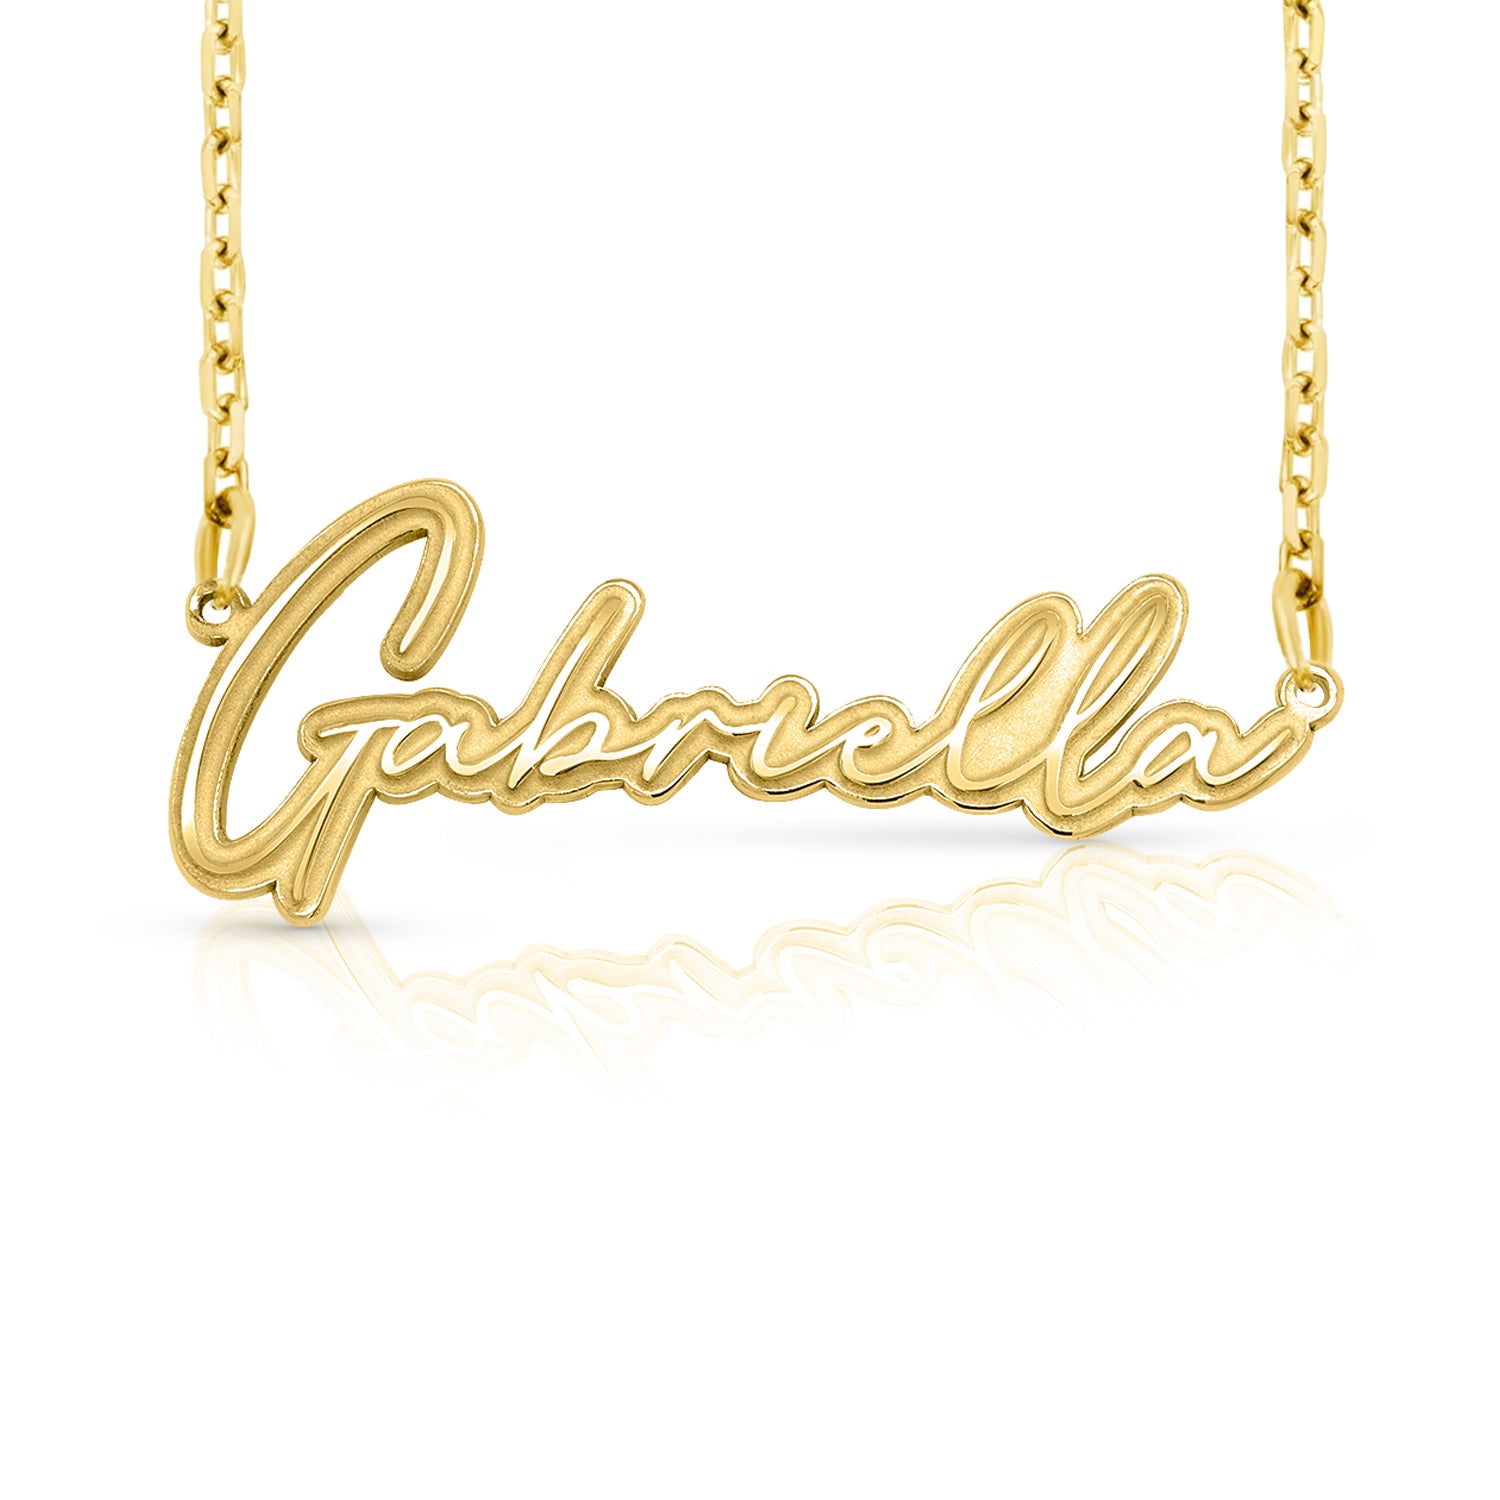 Gold necklace with a custom name pedant on a white background